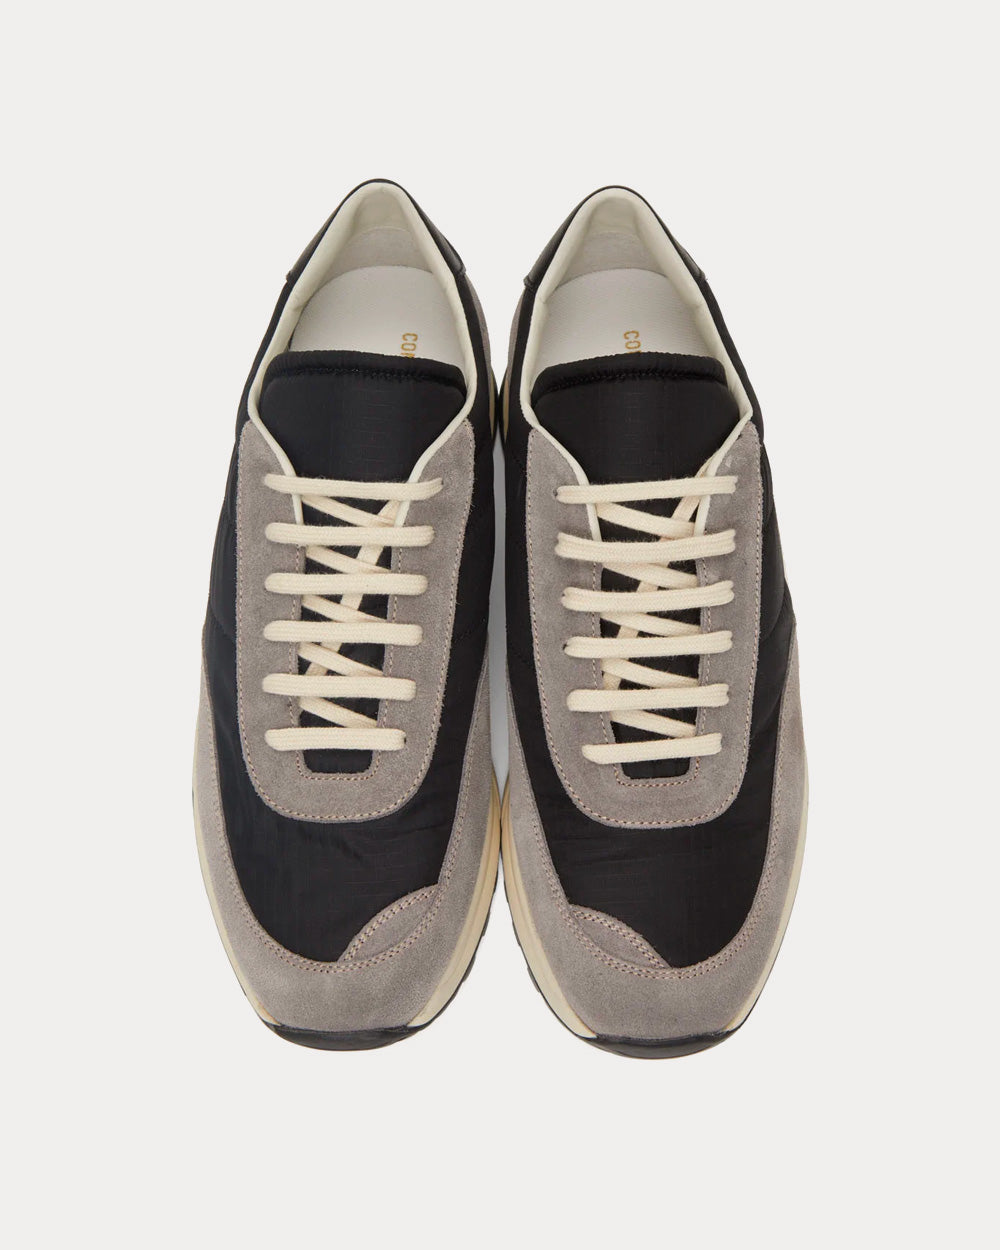 Common Projects - Track Classic Black / Warm Grey Low Top Sneakers